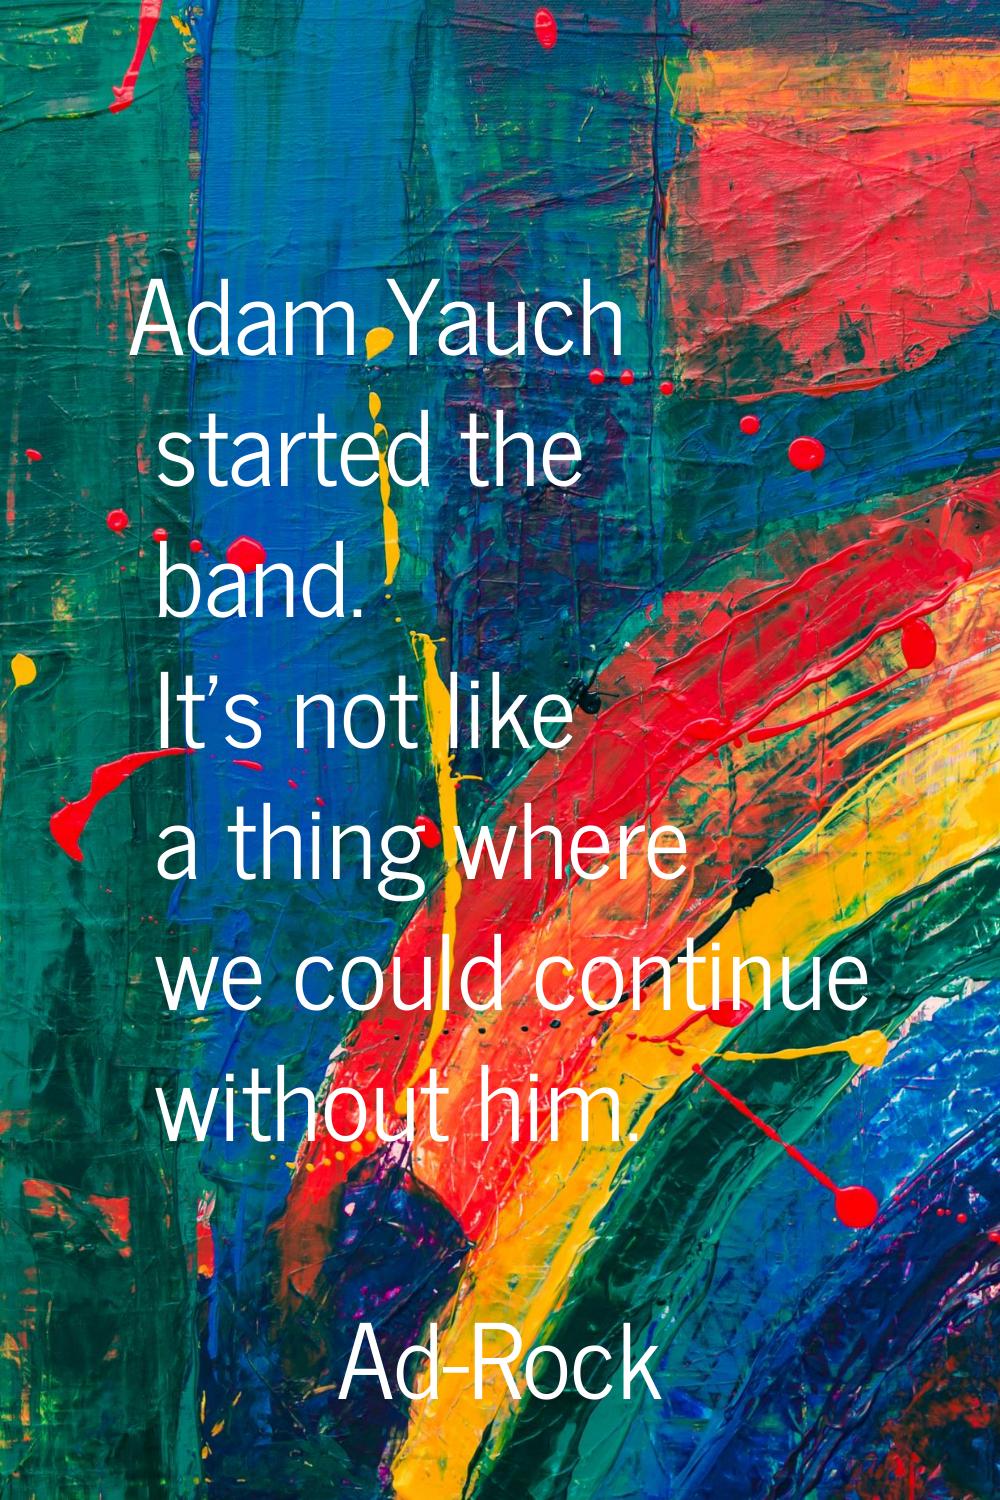 Adam Yauch started the band. It's not like a thing where we could continue without him.